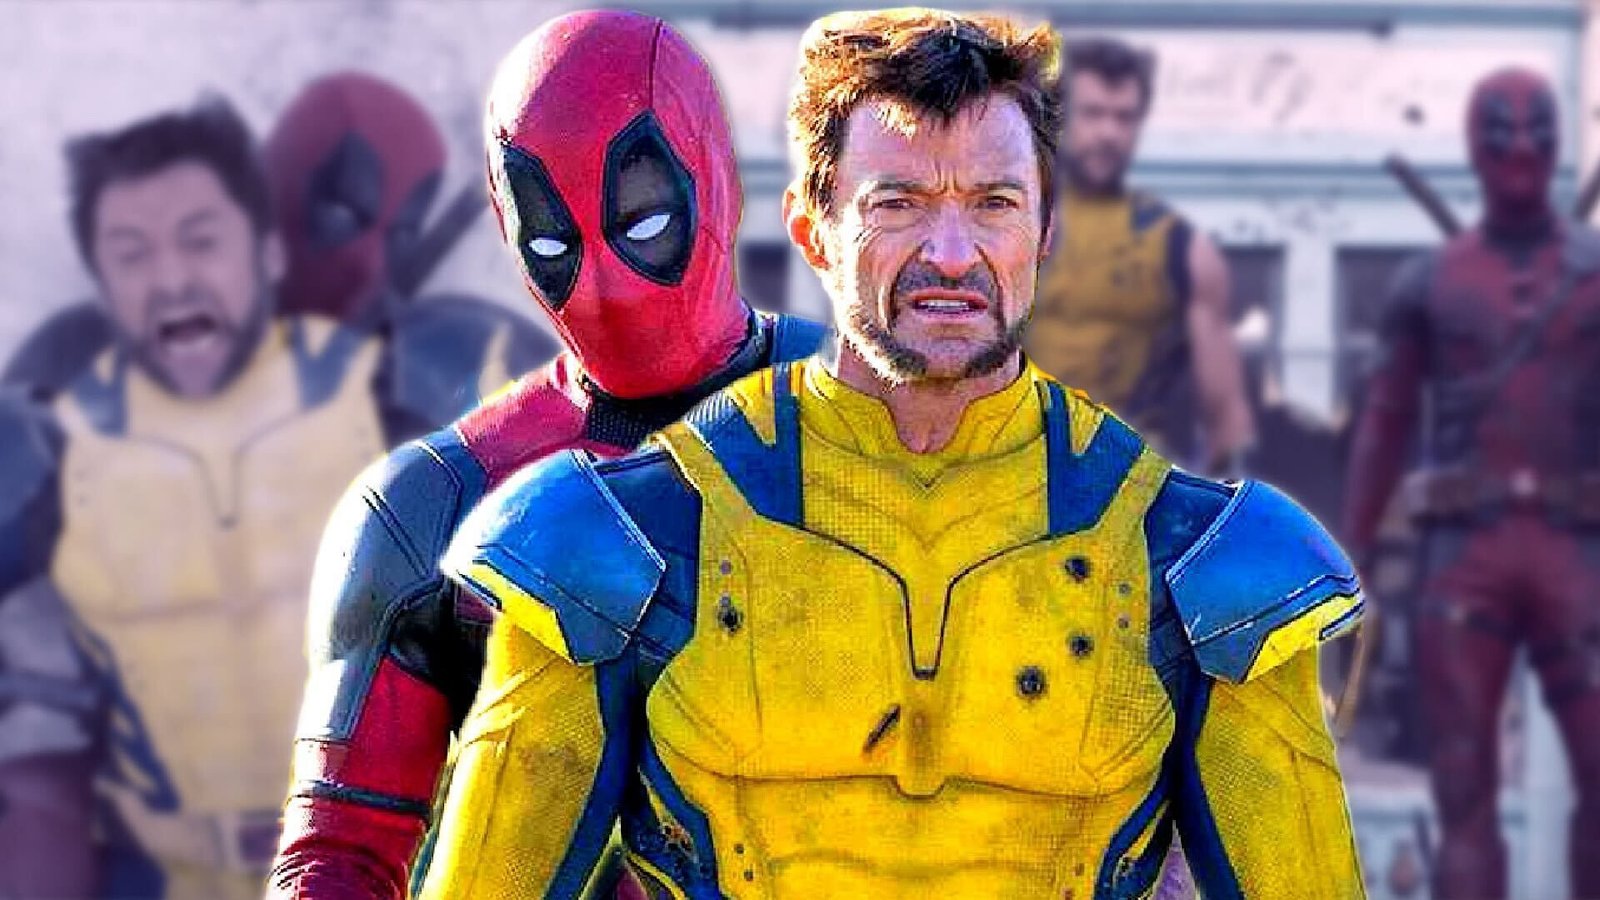 Ryan Reynolds Explains Why Hugh Jackman's Wolverine Will Not Break the Fourth Wall in Deadpool & Wolverine